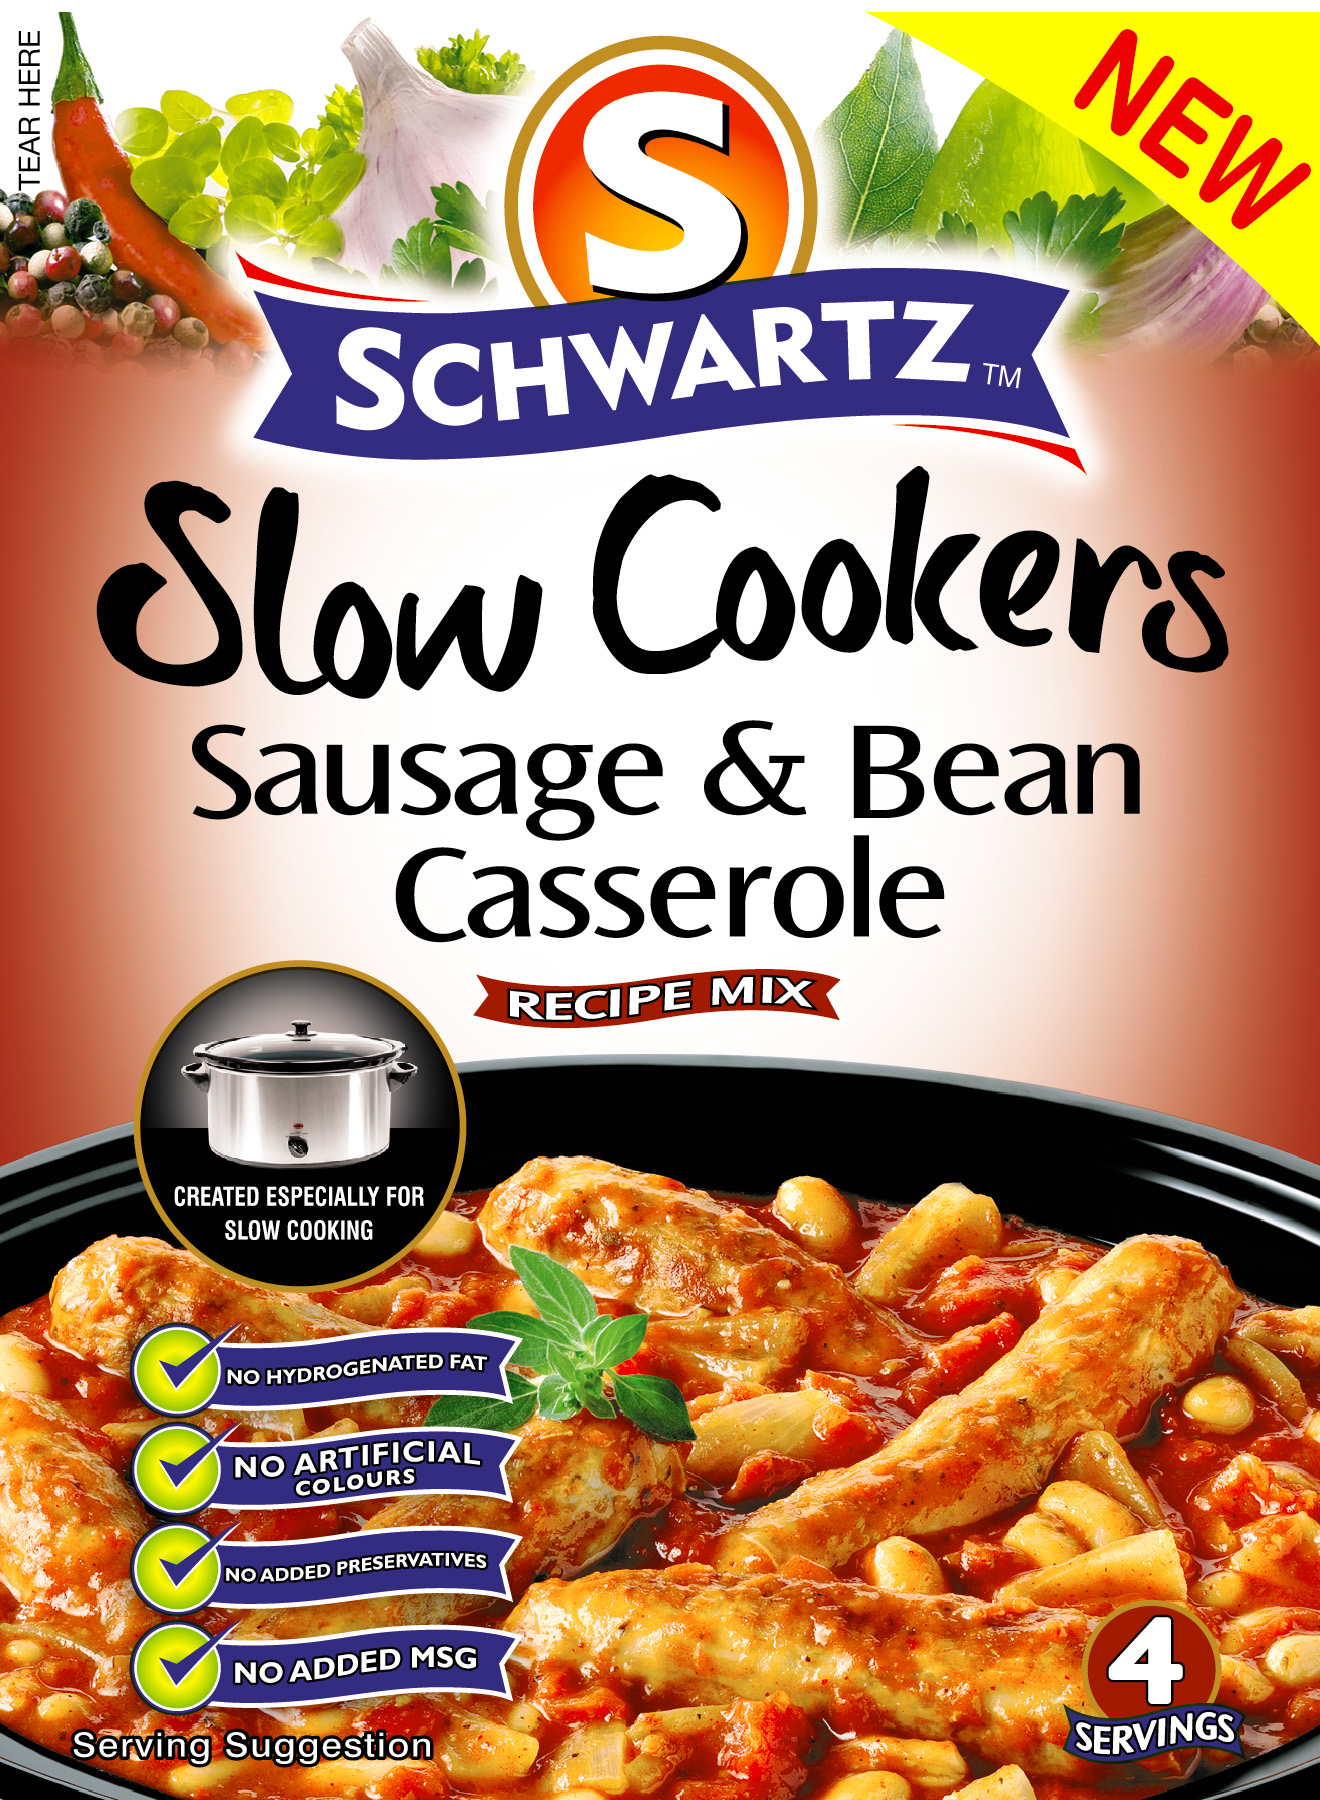 Schwartz Slow Cookers – recipe mixes - Parenting Without Tears